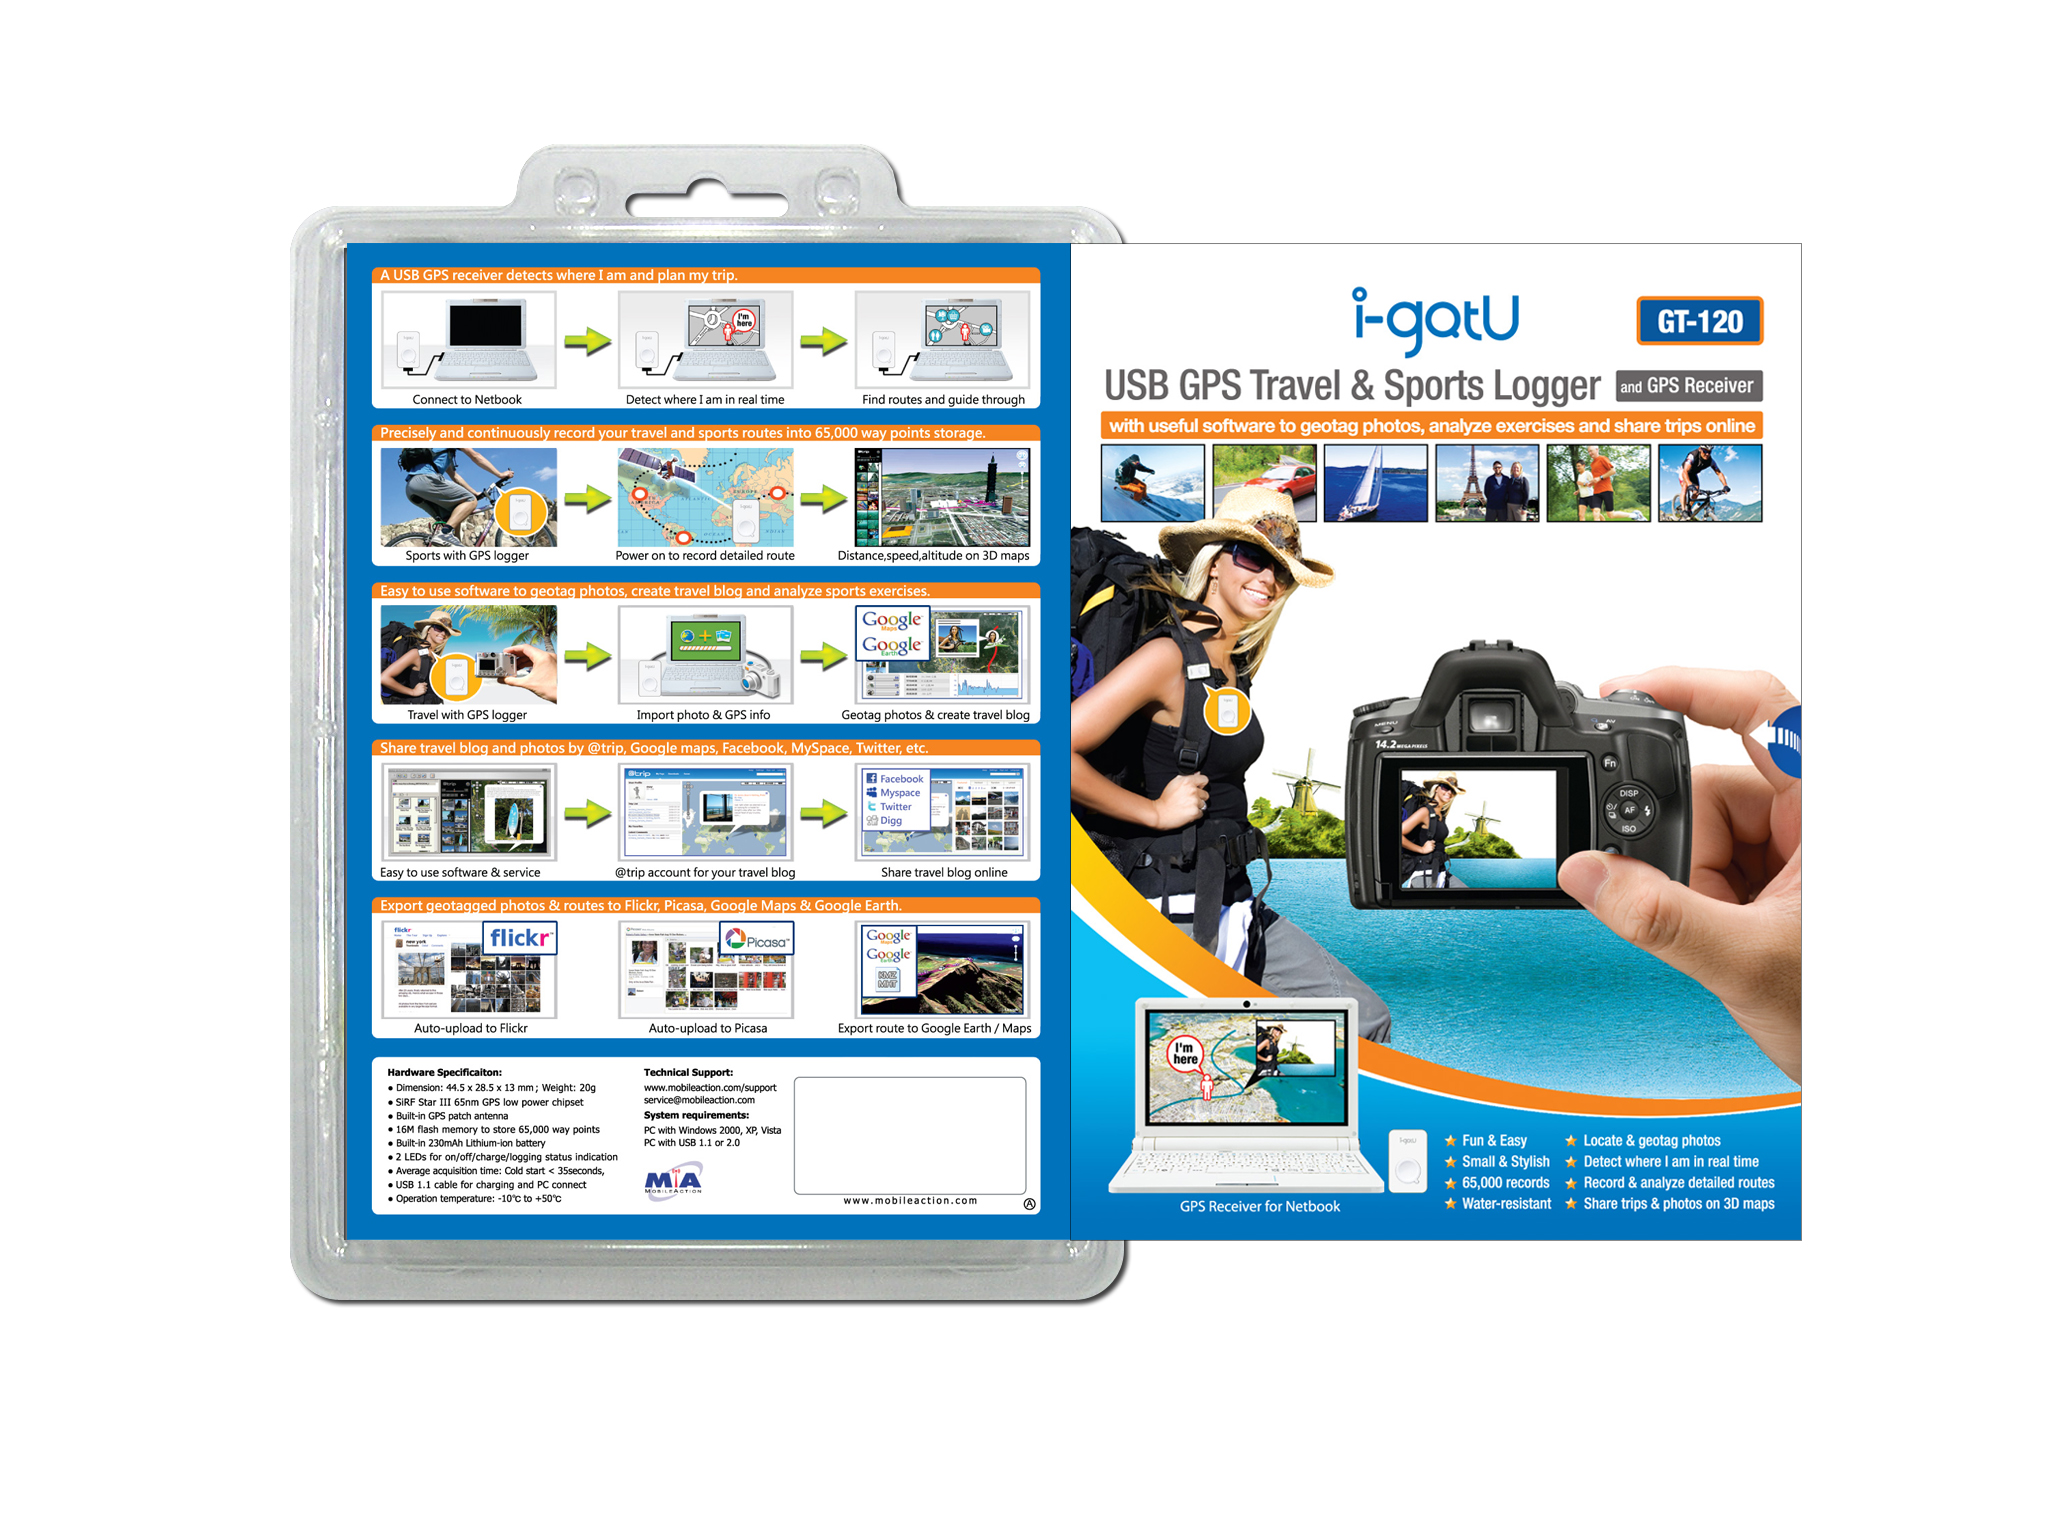 I Gotu Suite 3 0 A Complete Gps Software Suite For Travel Sports And Tour Guide